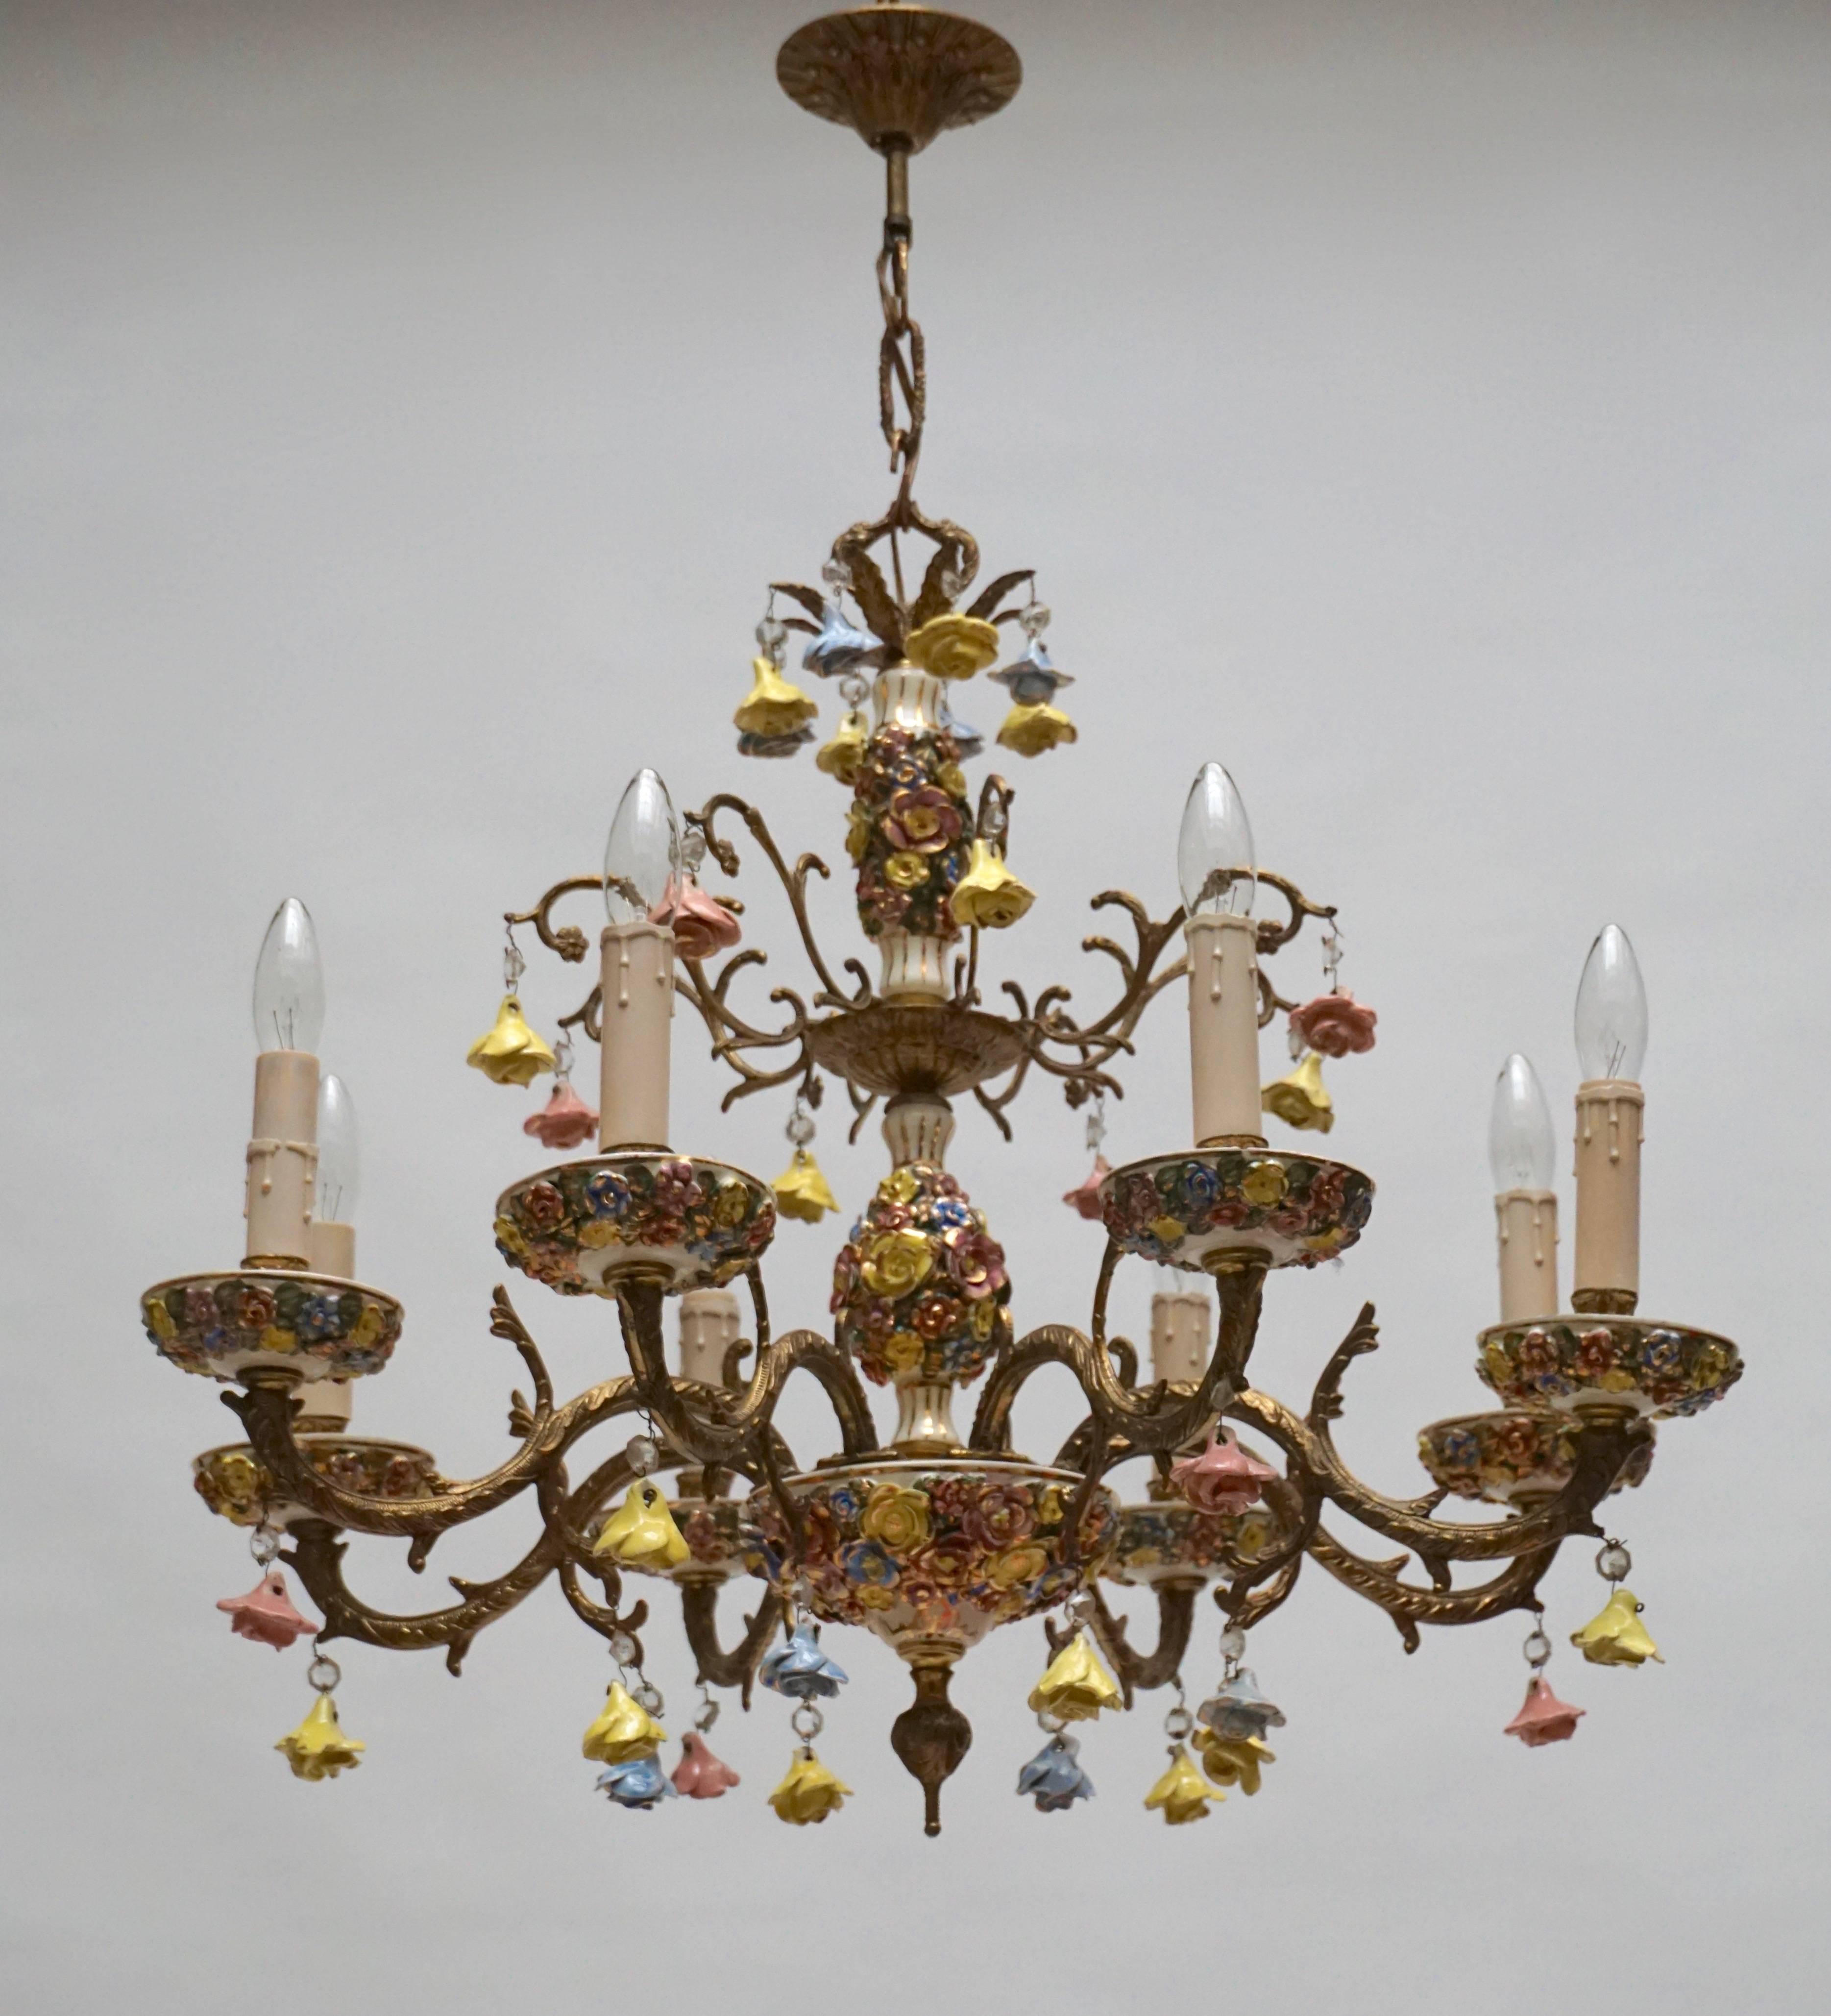 Wonderful eight-light handcrafted gilt metal with porcelain flowers chandeliers.
Eight E14 bulbs.
Measures: Diameter:68 cm.
Height fixture 58 cm.
Total height with the chain:80 cm.